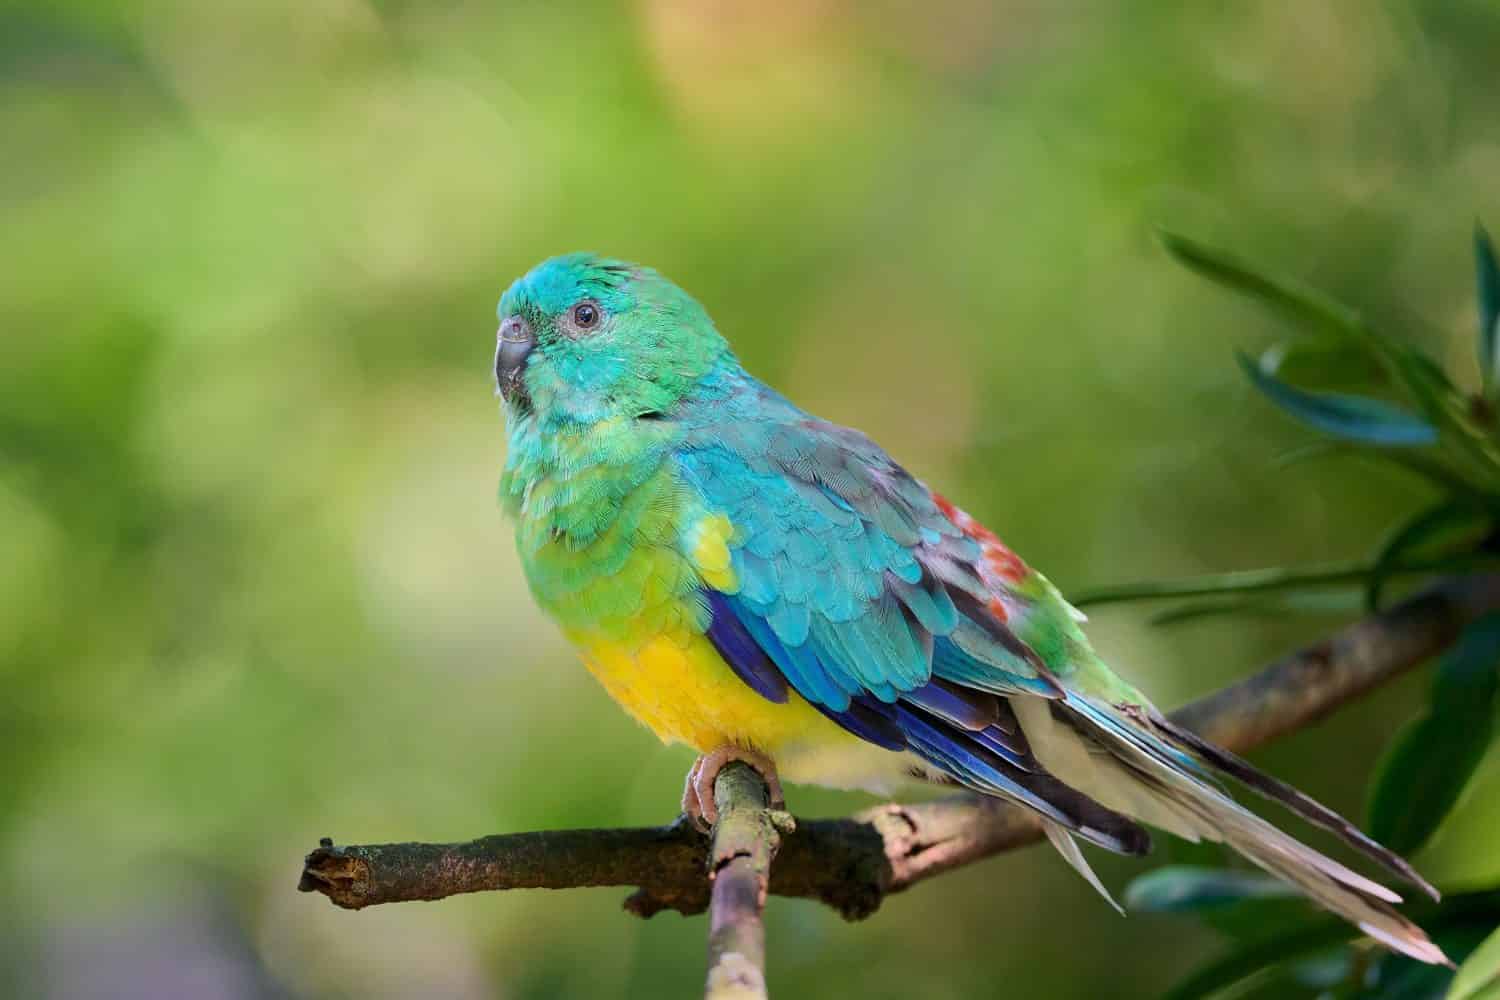 Red-rumped parrot (Psephotus haematonotus), also known as the red-backed parrot or grass parrot, is a common bird of south-eastern Australia. High Quality Photo.